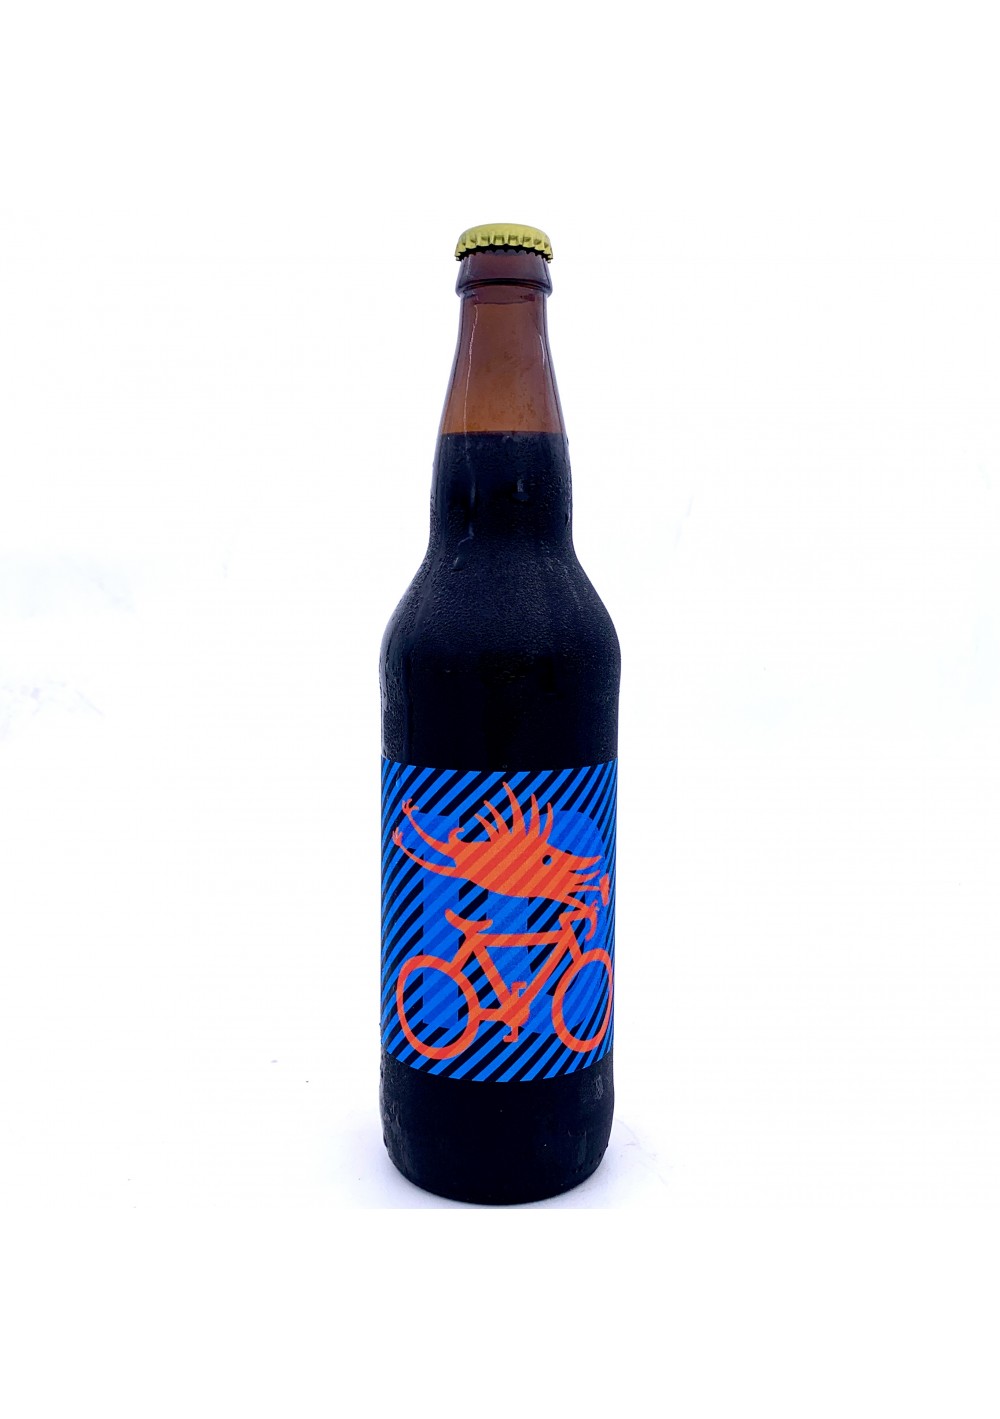 Cycle Brewing Company - 10 Year Blue Label - Imperial Stout